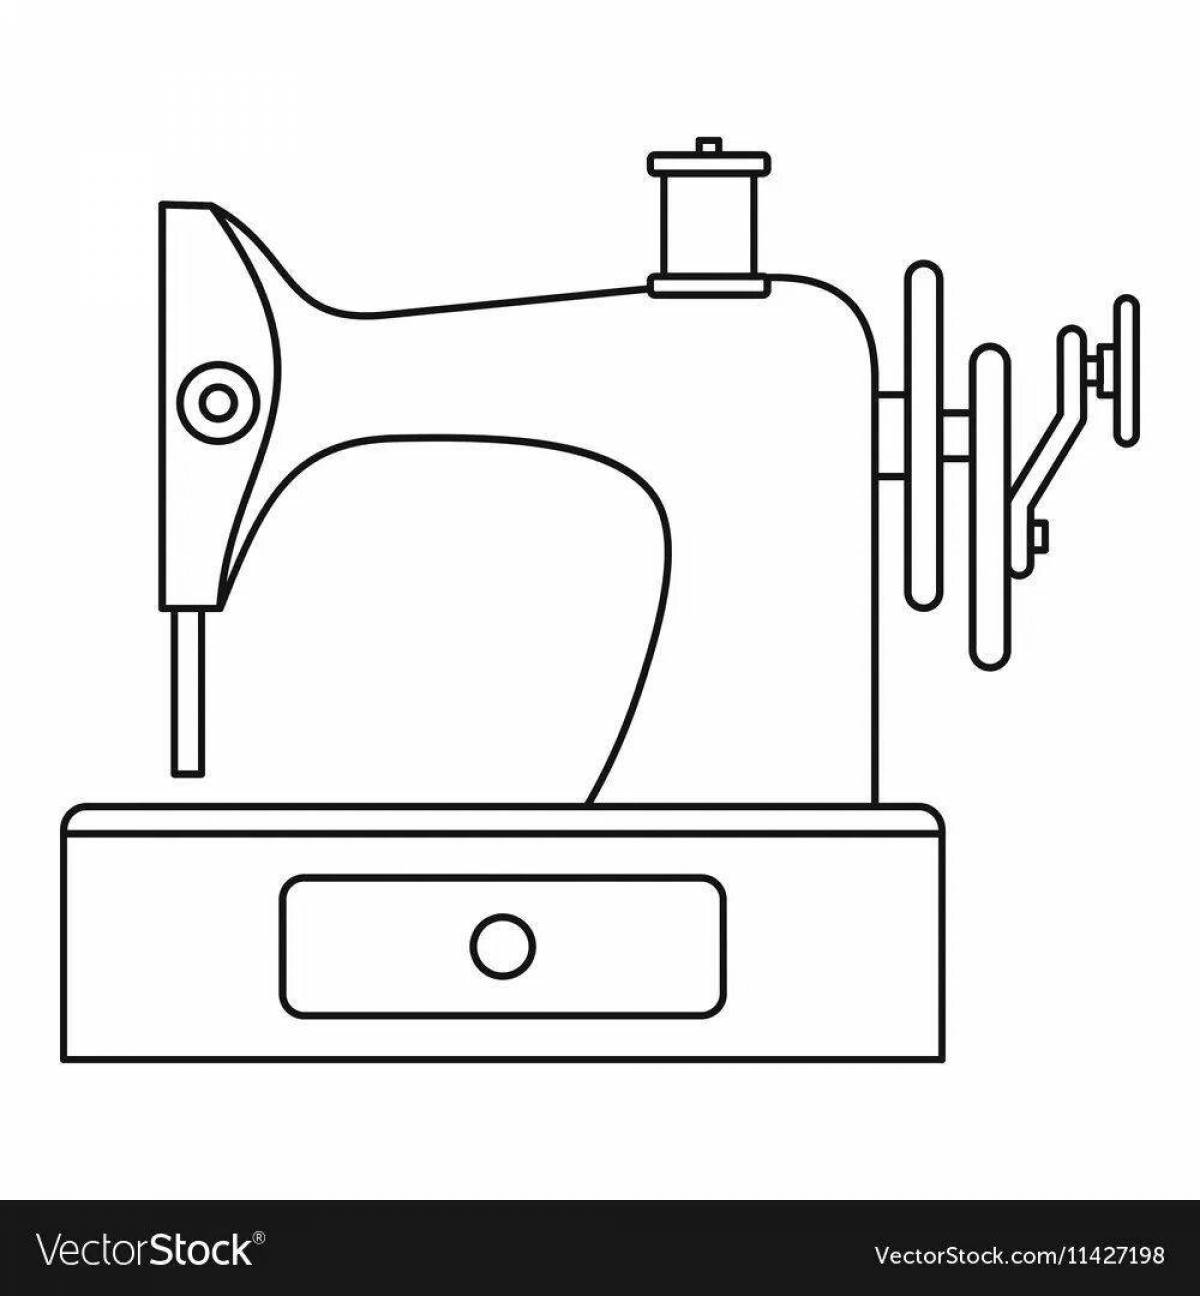 Colouring funny sewing machine